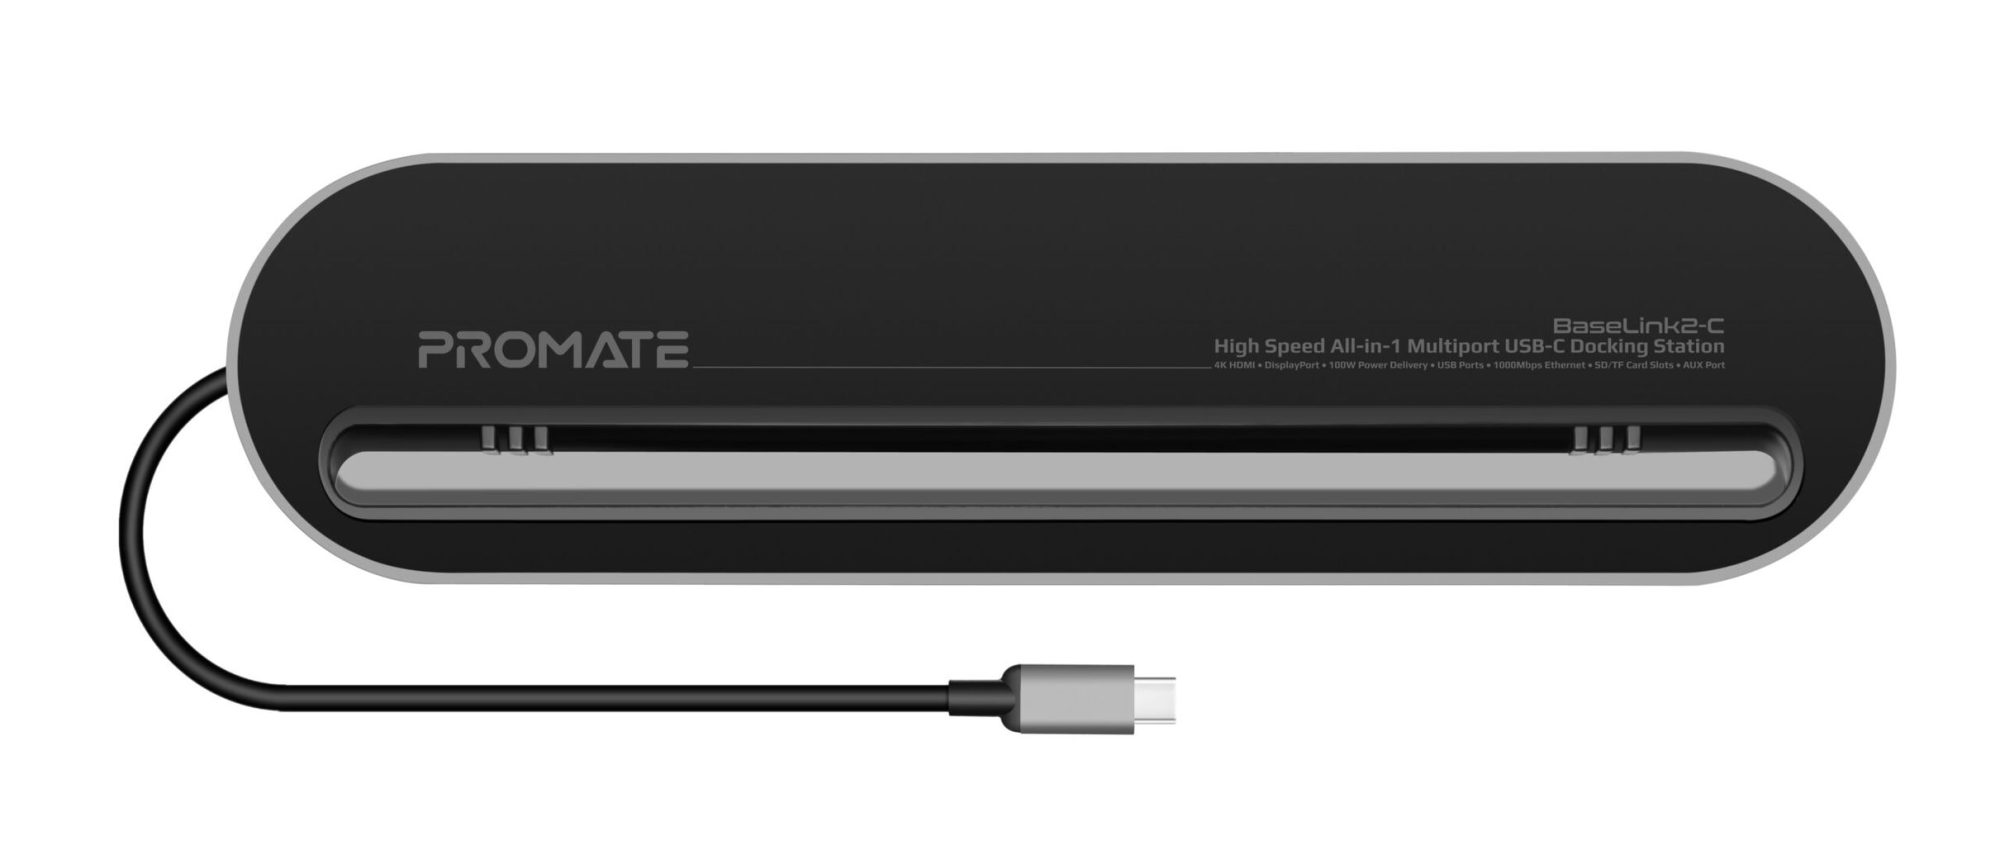 Promate USB-C Hub, 12-In-1 Type-C Adapter with 100W USB-C Power Delivery, 4K HDMI, Ethernet Port, TF/SD Card Slot, Type-C Data Port, 4 USB Port, Display Port, AUX and Built-In Tablet Stand, BaseLink2-C